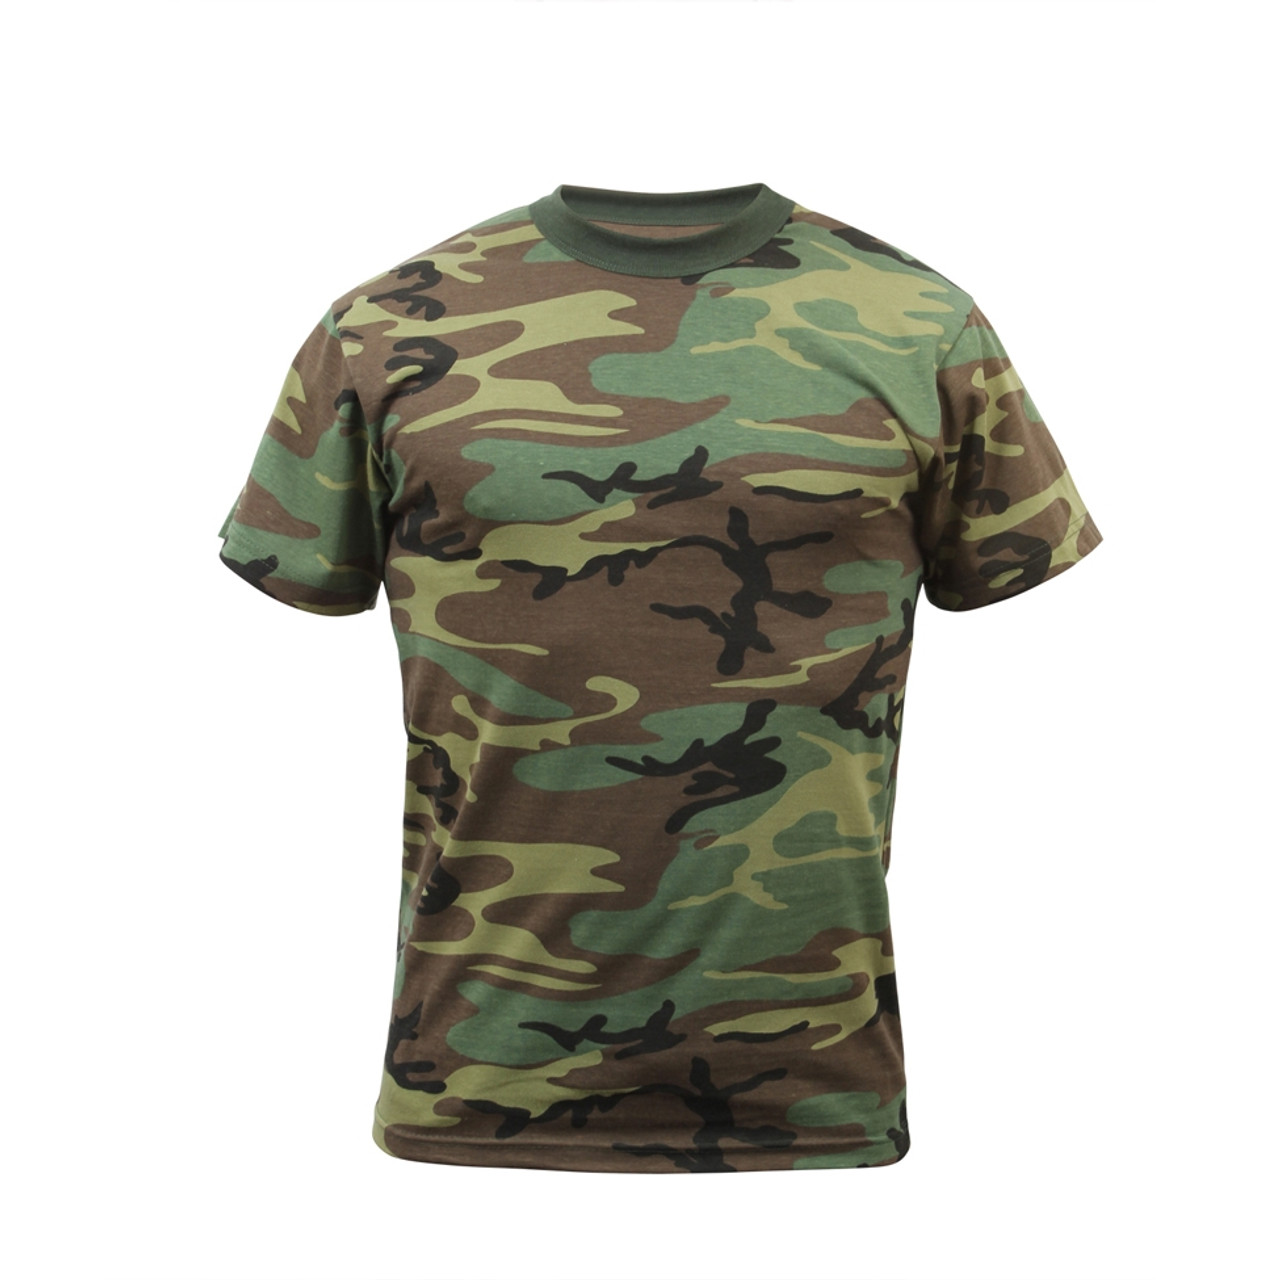 Military Camo Color T Shirt Collection | Fatigues Army Navy Gear